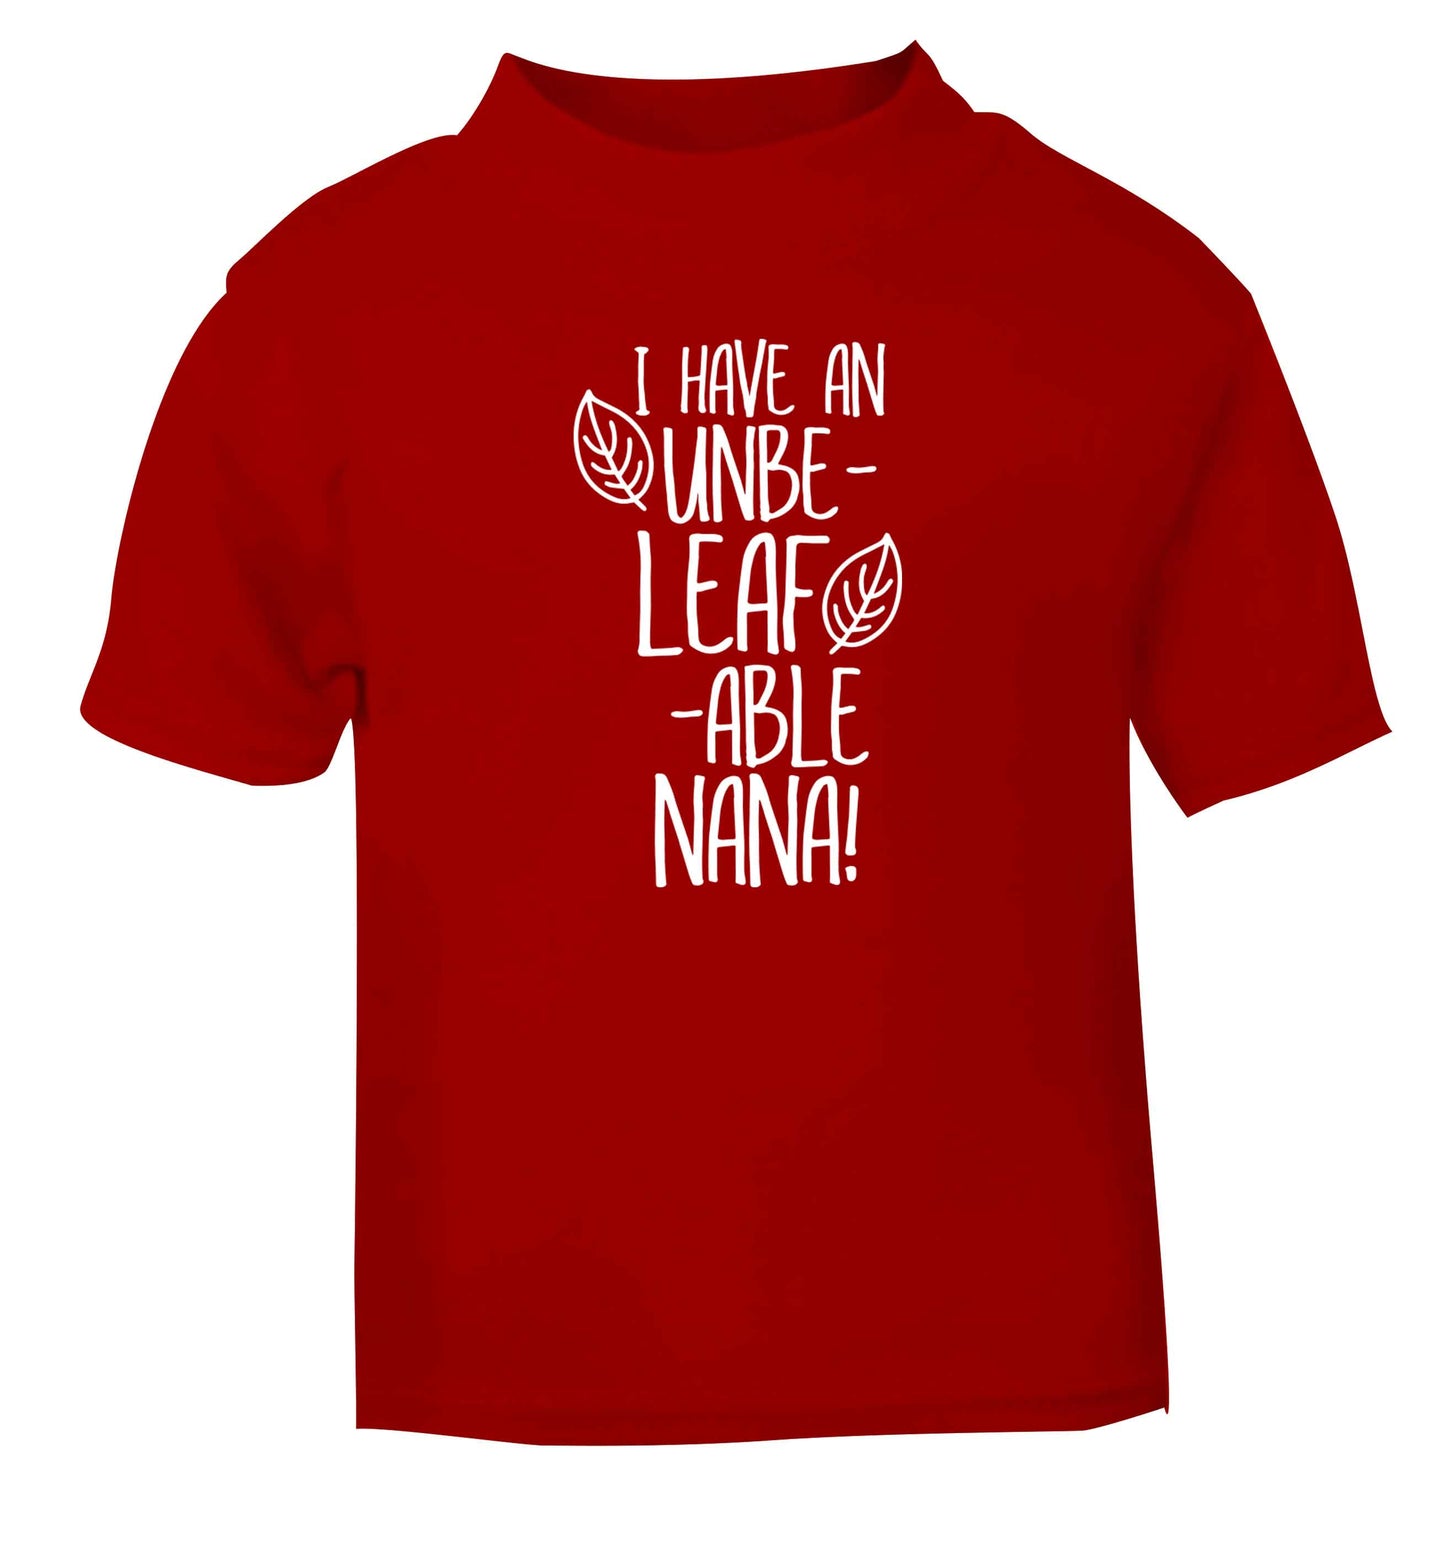 I have an unbe-leaf-able nana red Baby Toddler Tshirt 2 Years